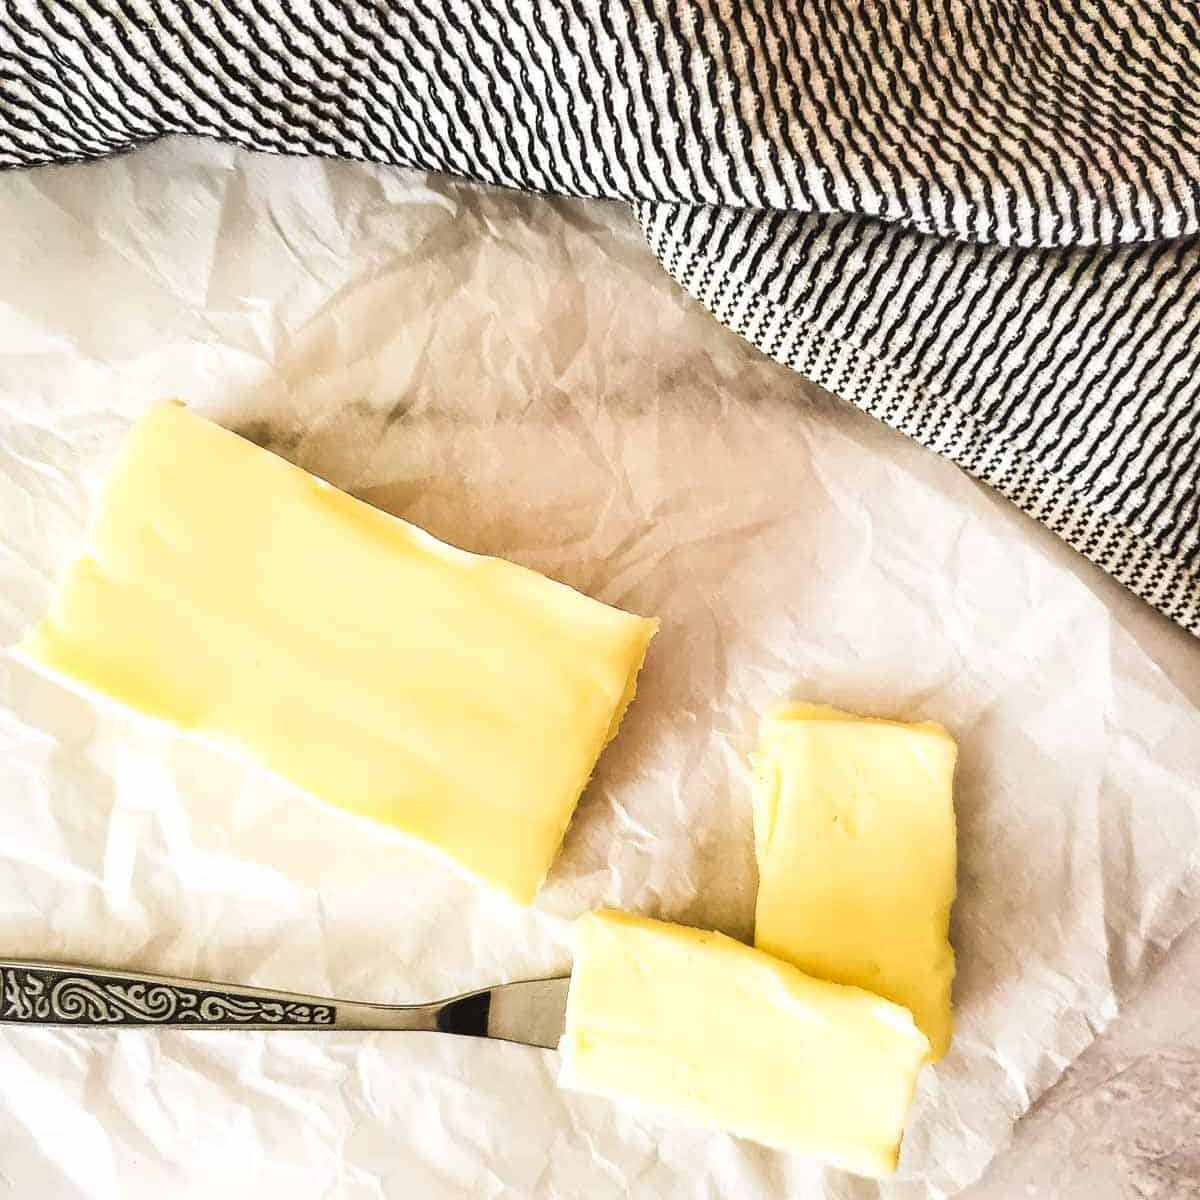 A rectangular block of homemade cultured butter on a crumpled piece of parchment paper next to a napkin.